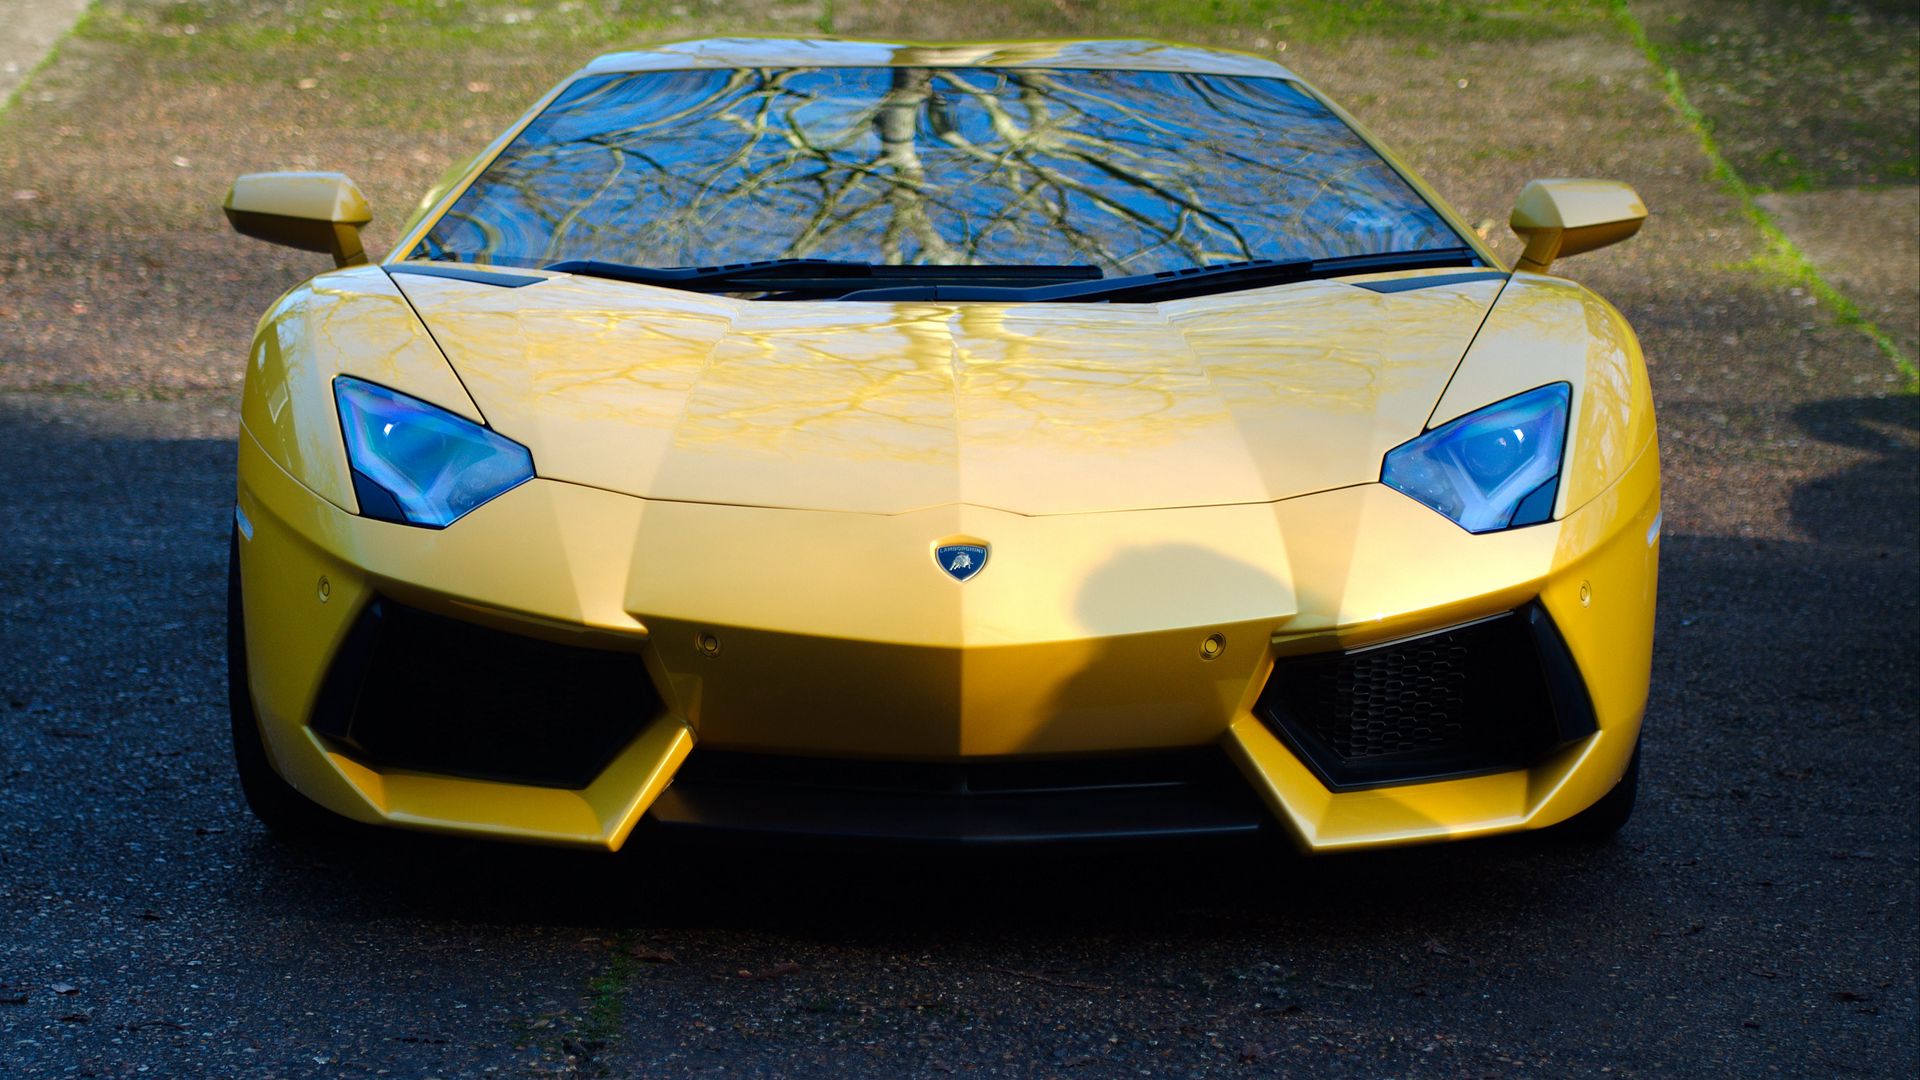 Premium Photo | A yellow lamborghini with a burning fire wallpaper  background illustration images